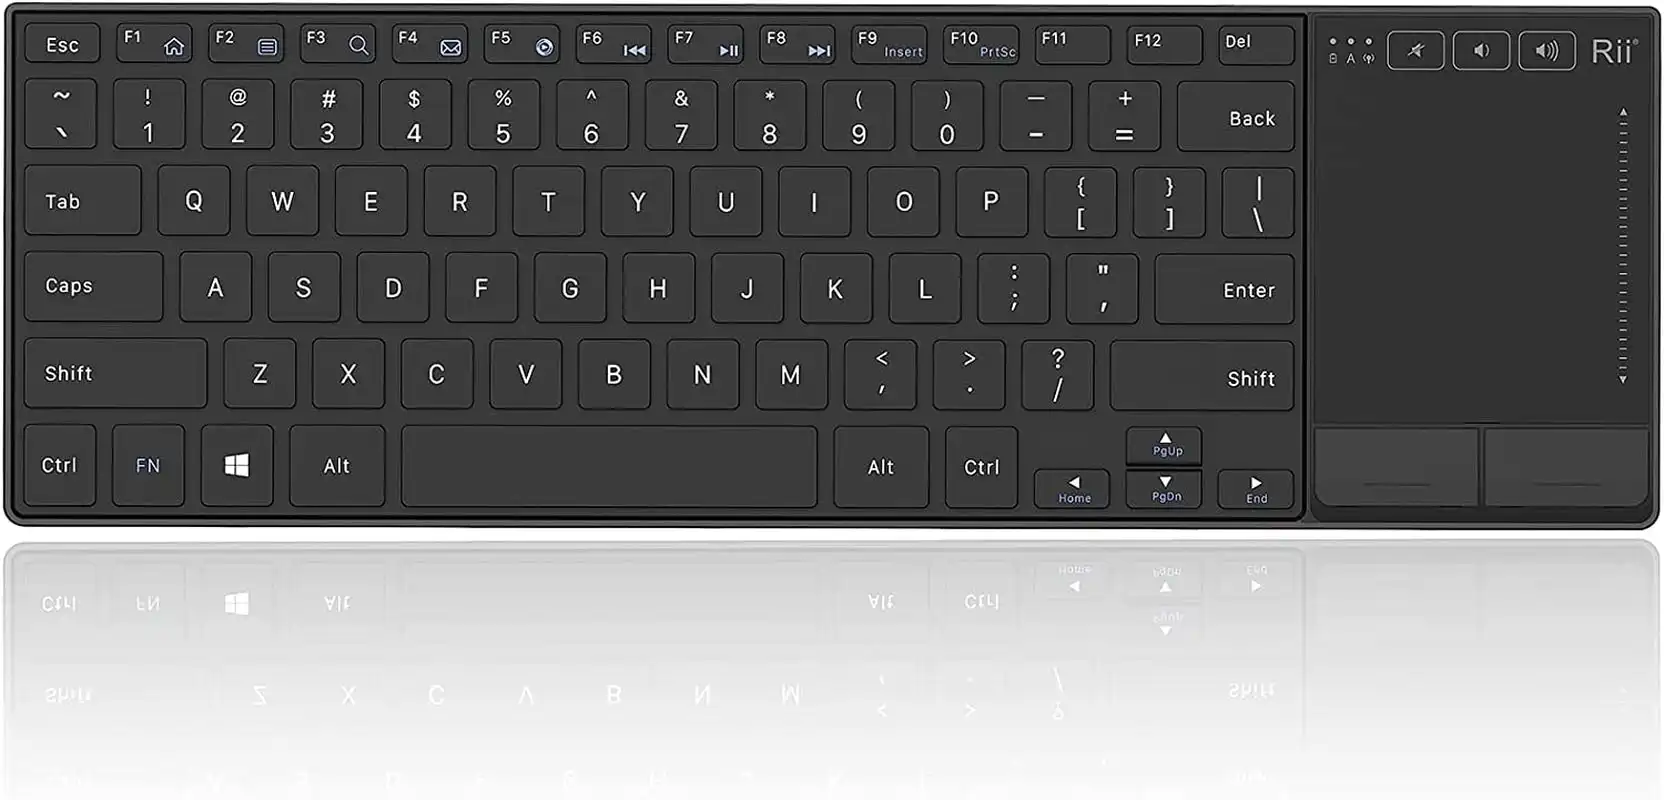 Rii K22 Wireless Keyboard for Windows,Ultra Slim Silent Keyboard with Touchpad,2.4 Ghz Wireless Computer Keyboard,Compatible with PC, Laptop